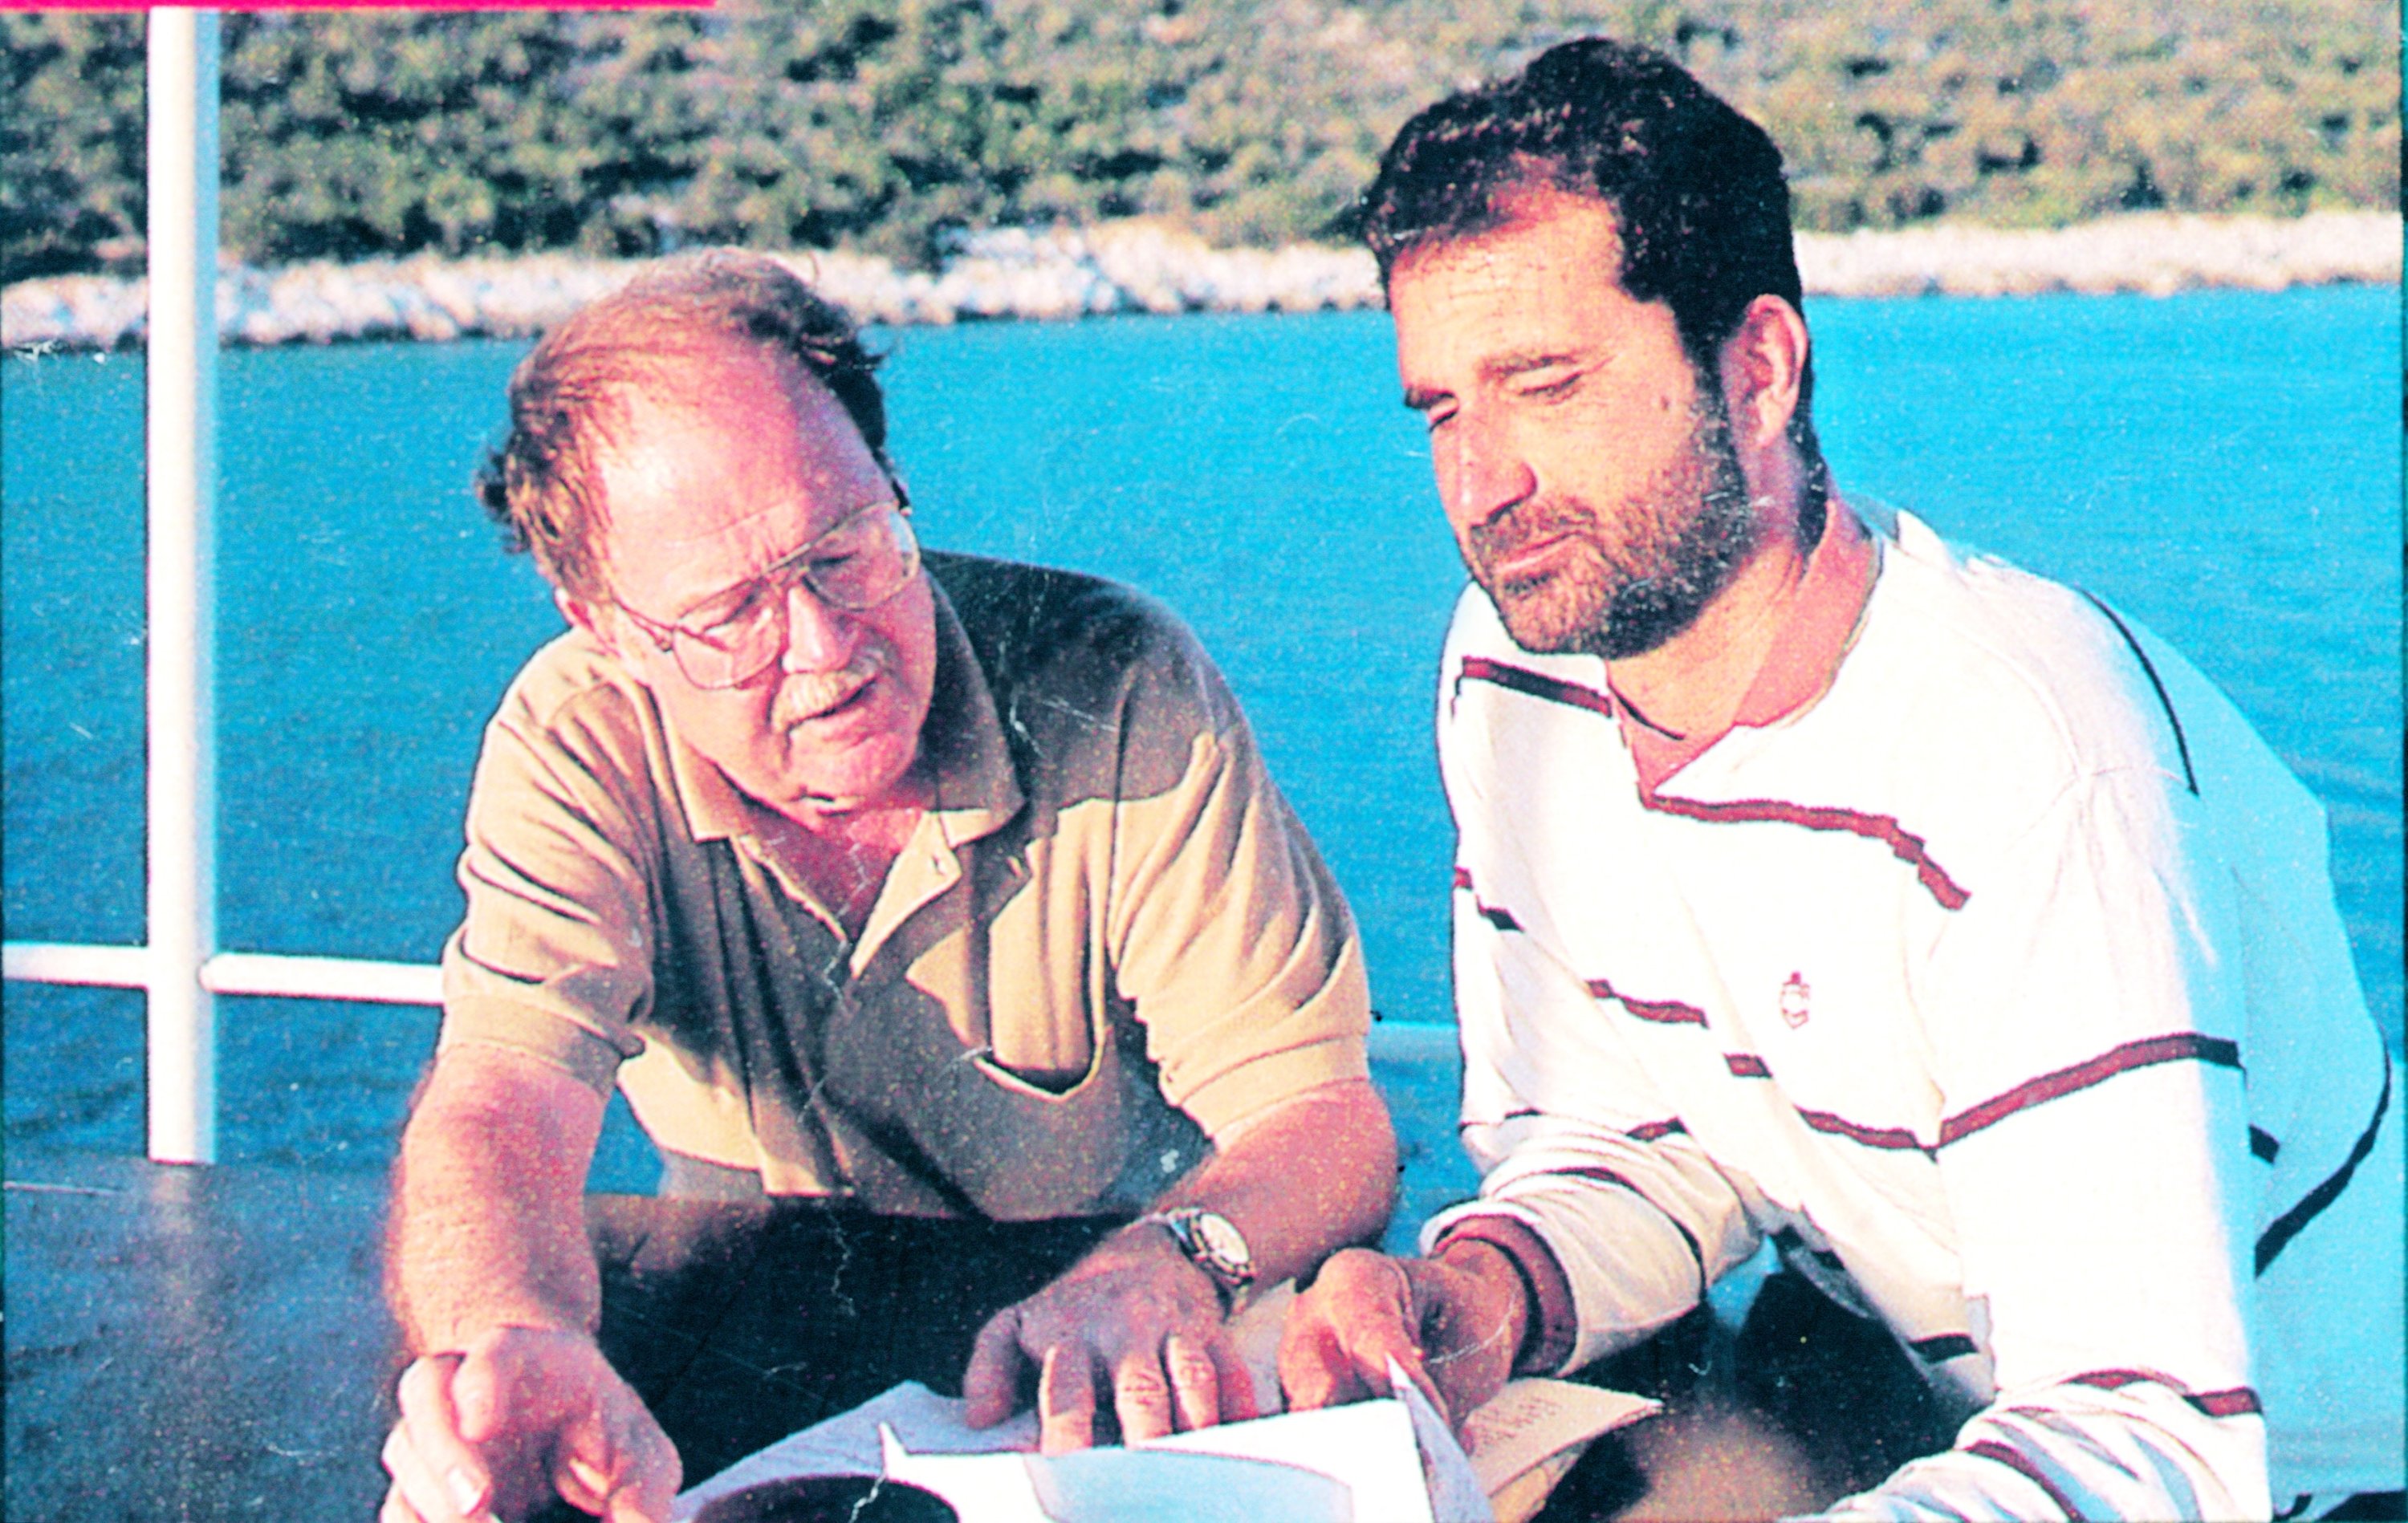 Professor George Bass (L) and researcher Tufan Turanlı examine plans to investigate the shipwreck of Uluburun in Bodrum in southwestern Turkey, Oct. 13, 2001. (FILE Photo)